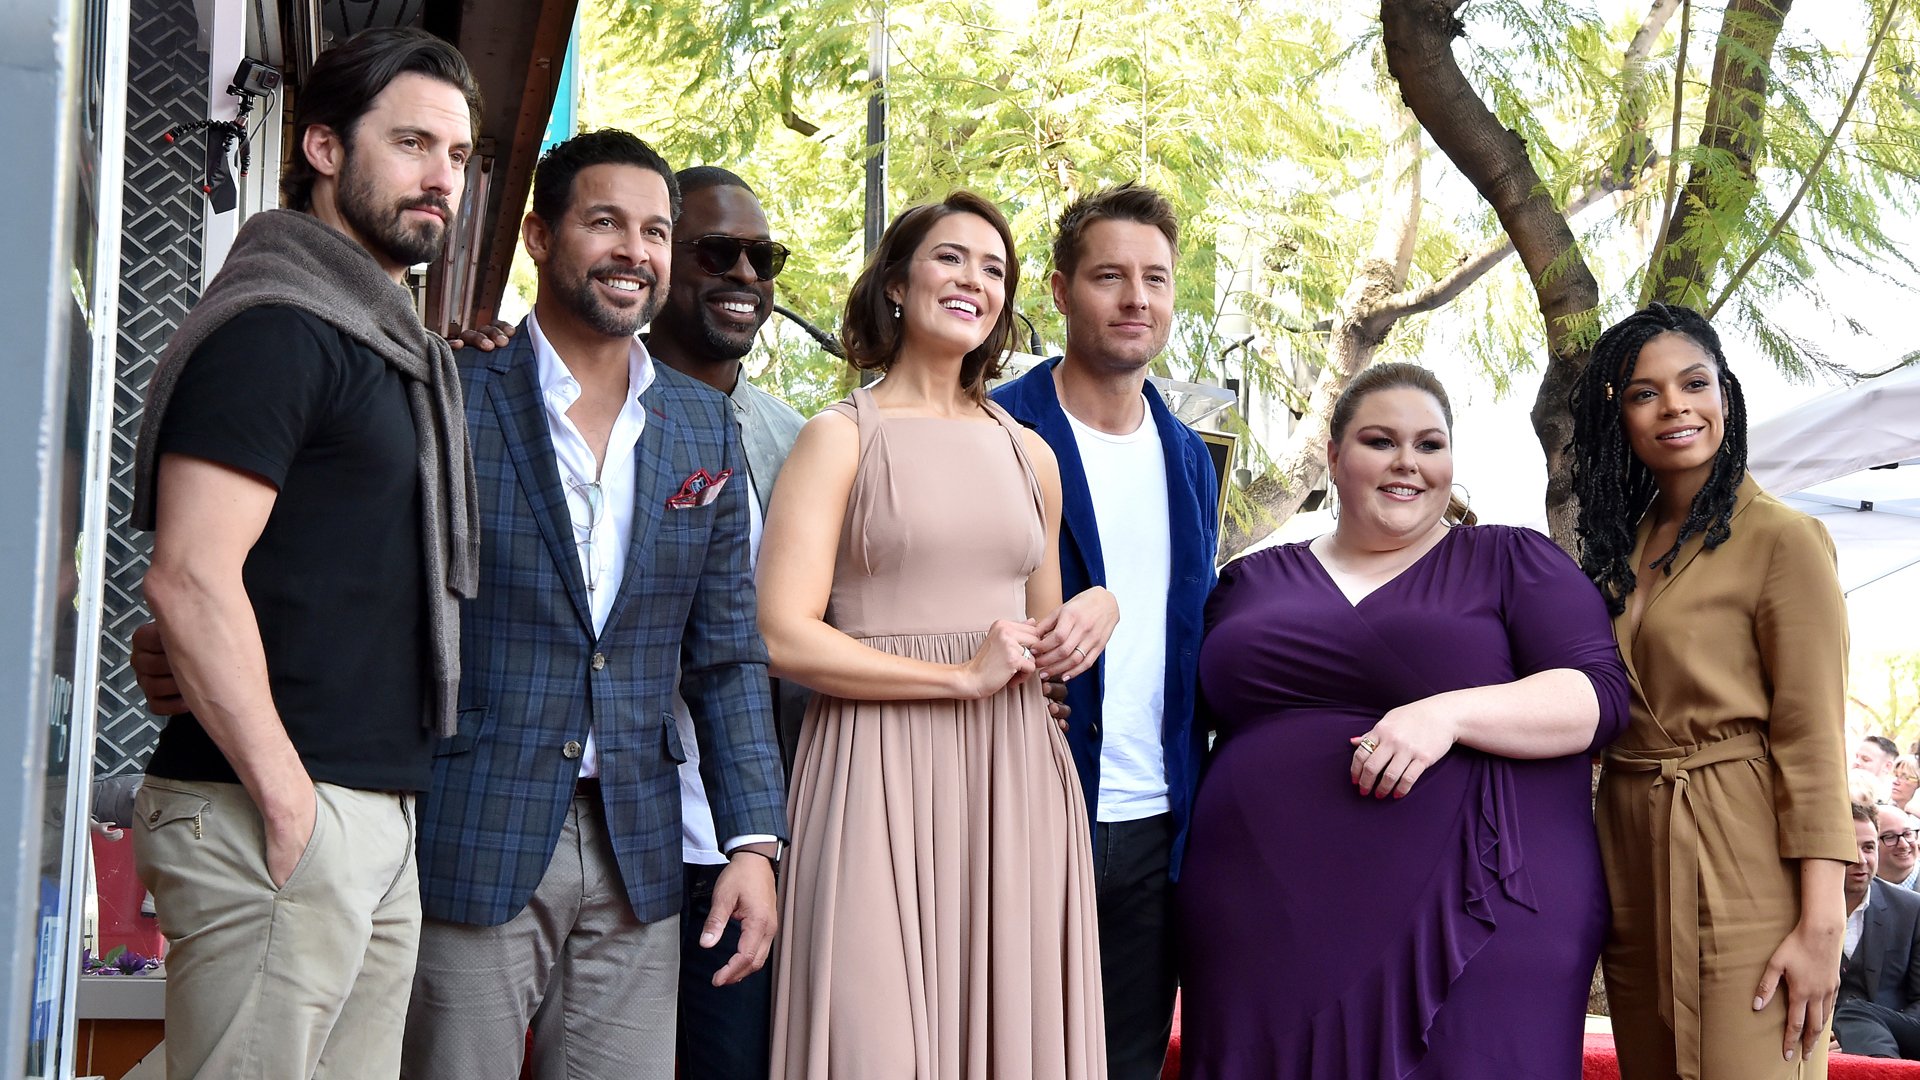 This Is Us' Season 6: Mandy Moore Says Fans Will Be Talking About the Season  5 Ending Until the Premiere